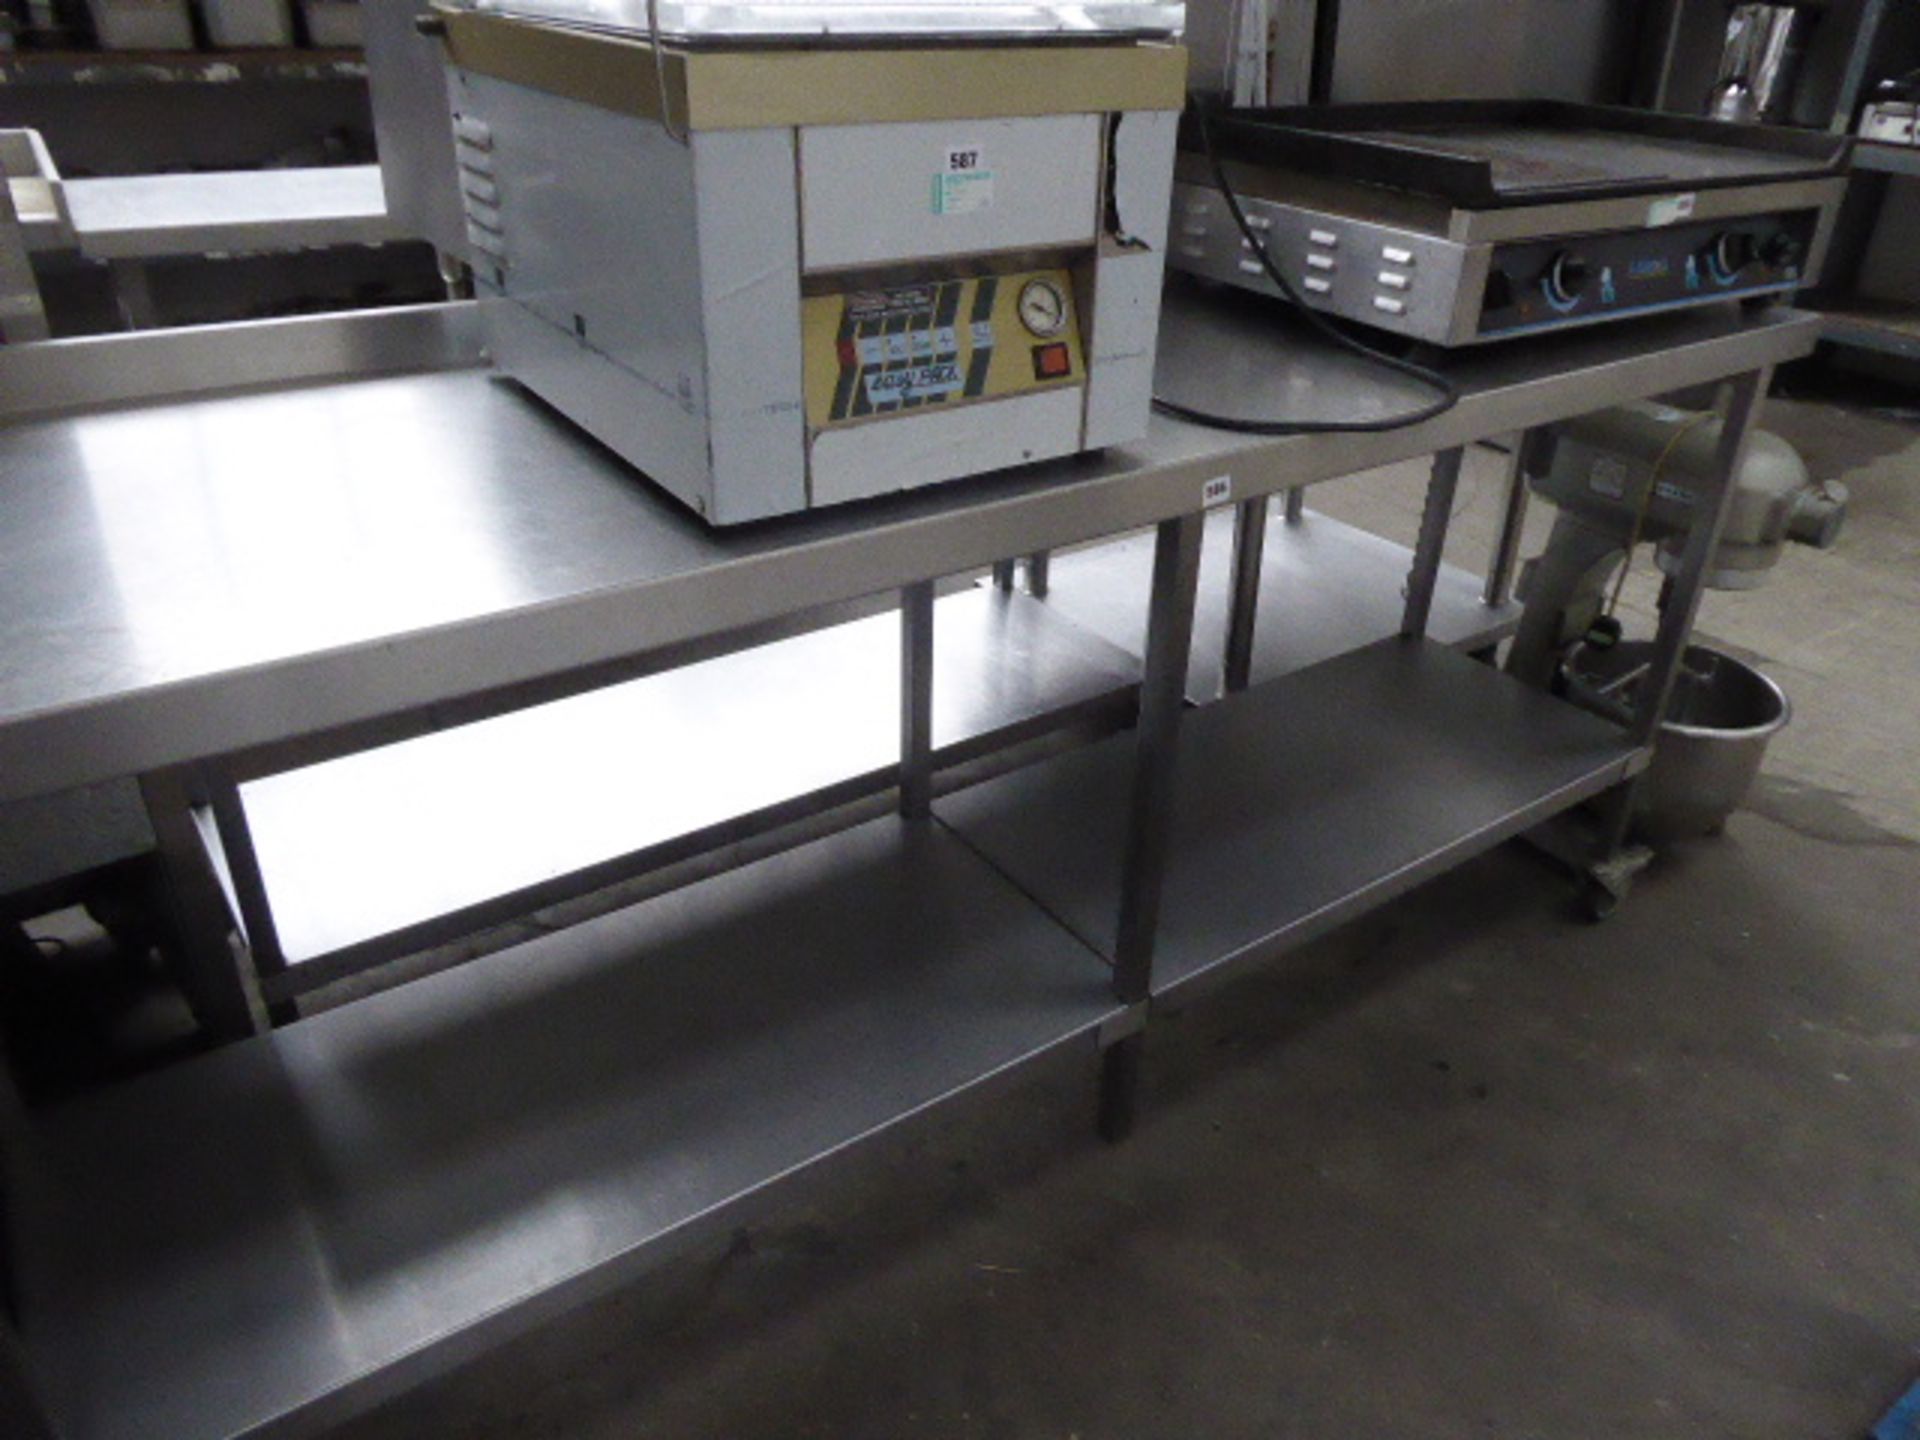 210cm stainless steel mobile preparation table, with shelf under